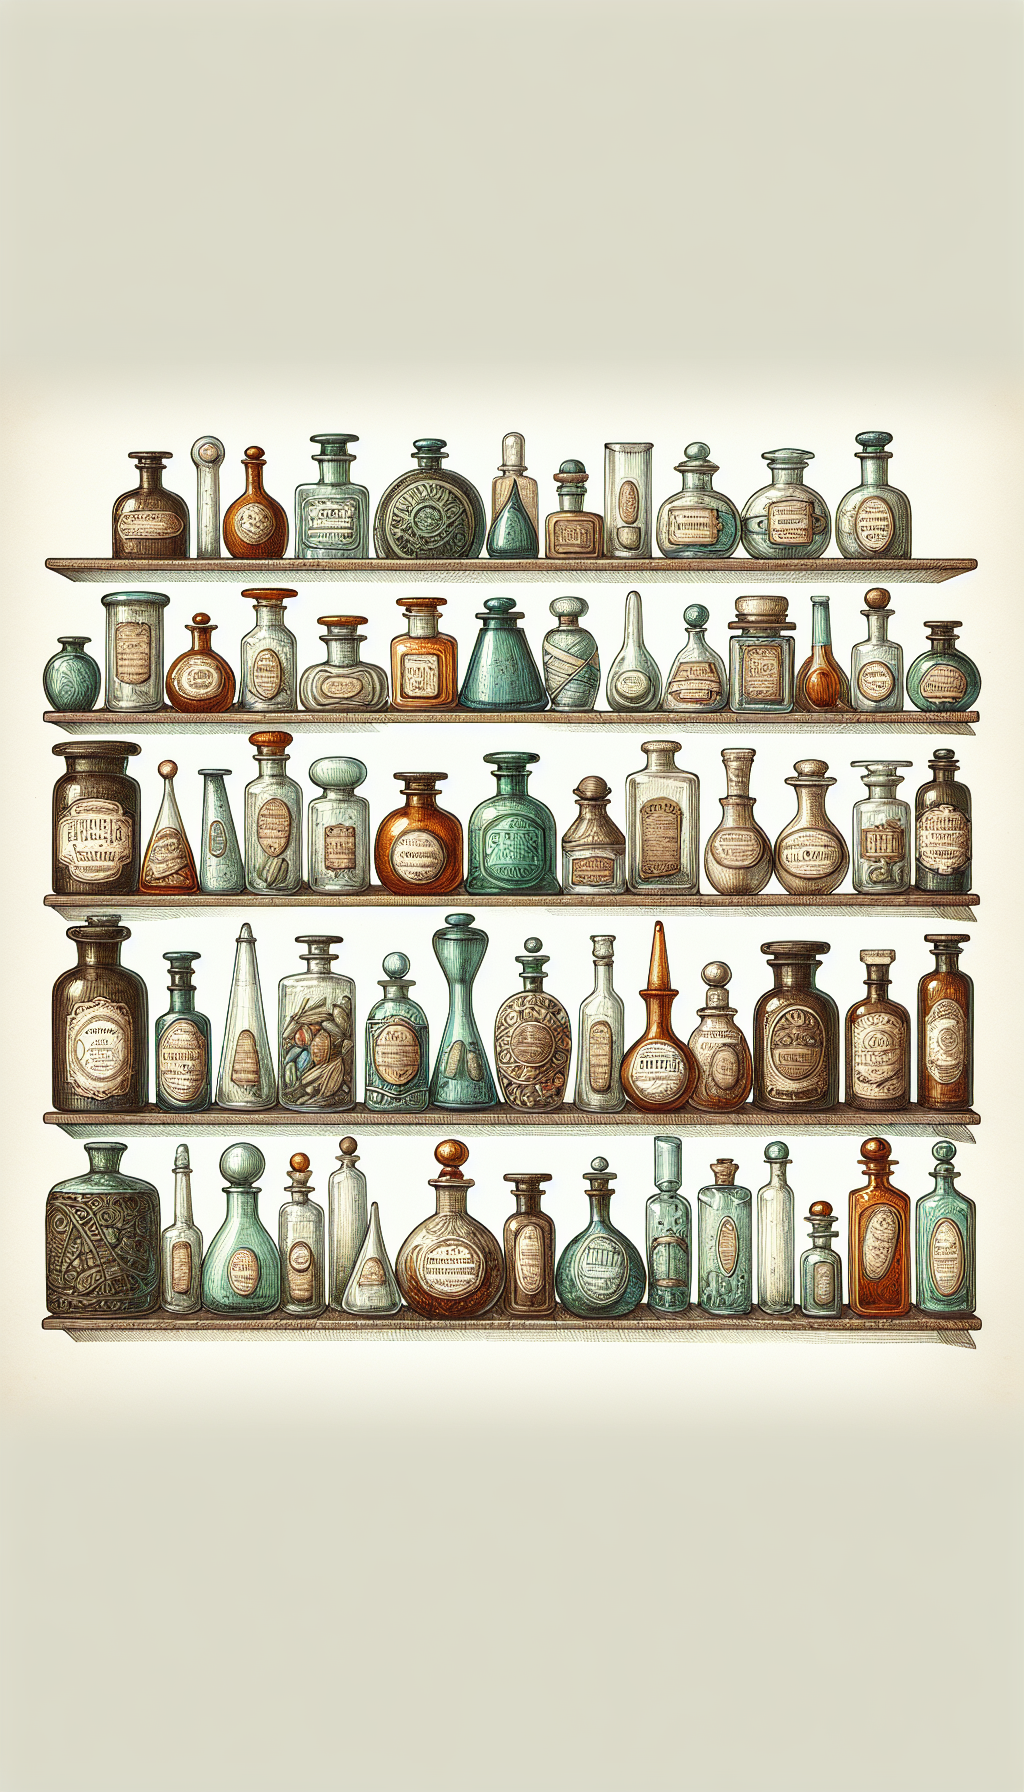 A whimsical cross-section of an aged apothecary shelf is depicted, showcasing a lineup of antique medicine bottles varying in silhouettes and seam lines, from smooth pontil marks to machine-cut threads. The illustration is a collage of styles, with bottles rendered in detailed line art, watercolor shadows, and sepia-toned highlights, each meticulously labeled to aid in identifying their respective historical eras.